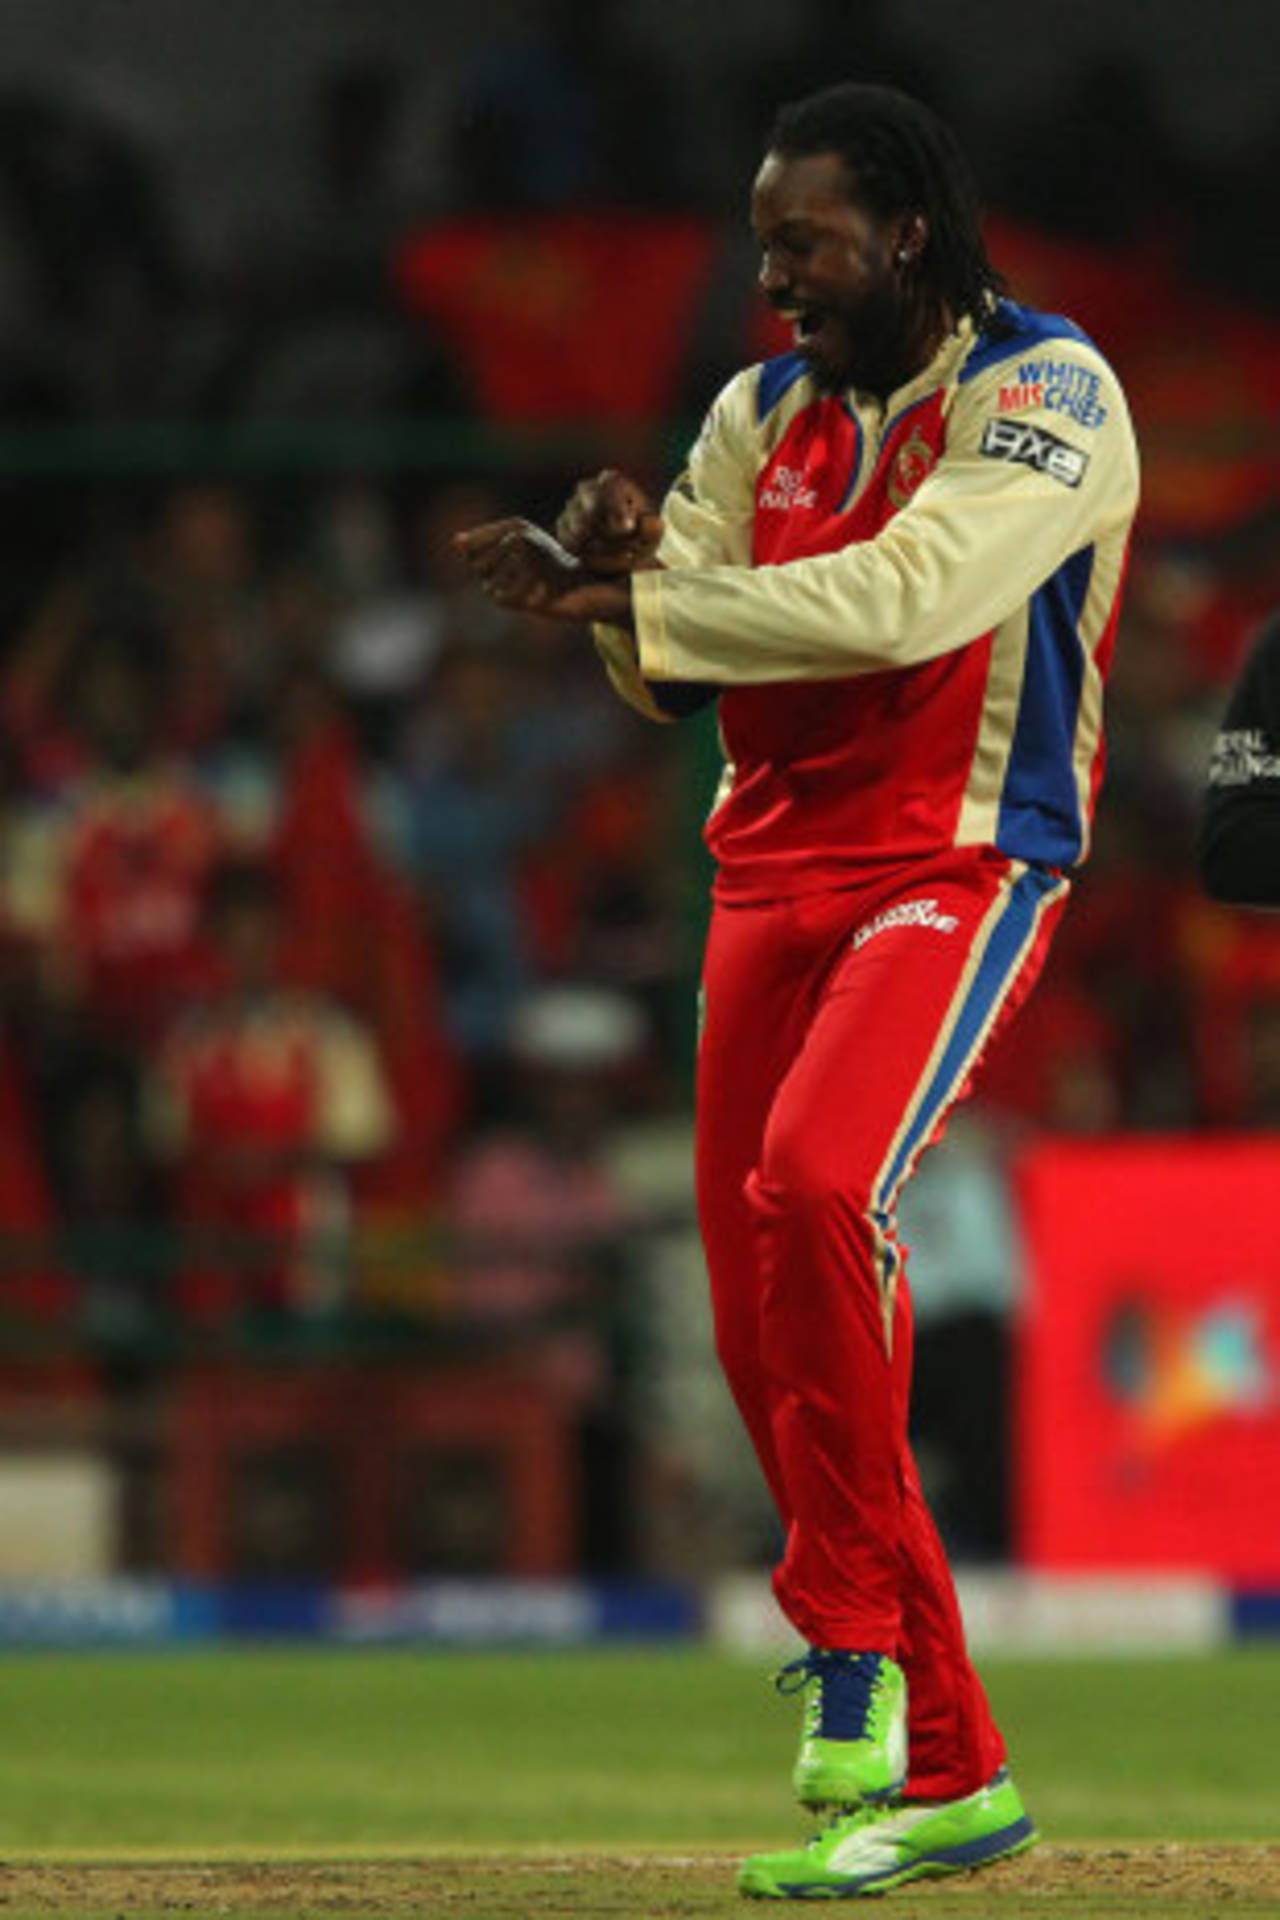 Chris Gayle pulled out his <i>gangnam style</i> after dismissing Ali Murtaza&nbsp;&nbsp;&bull;&nbsp;&nbsp;BCCI